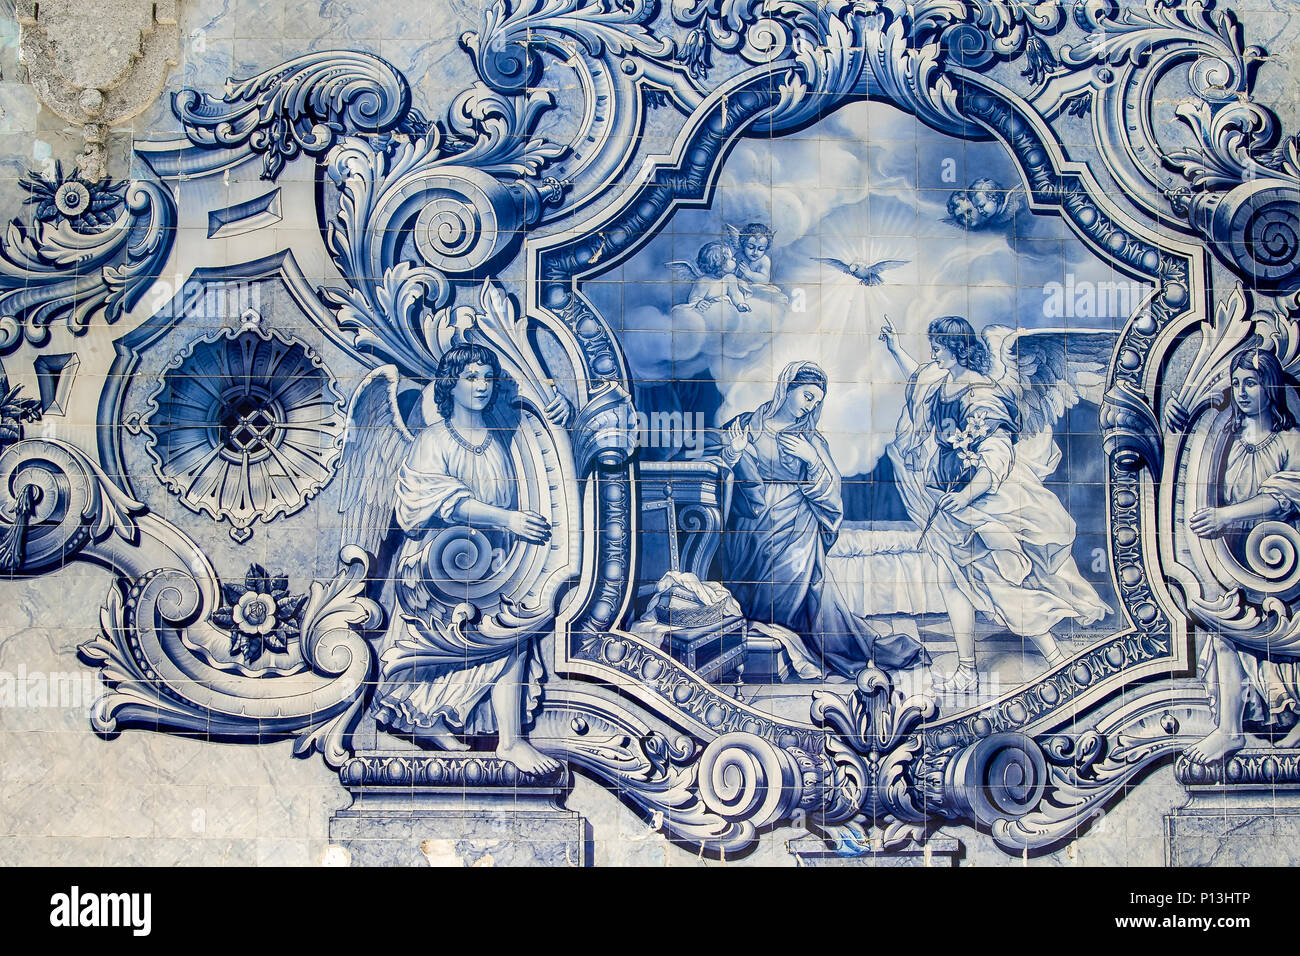 Details of an azulejo panel at the staircase that ascends to the Nossa Senhora dos Remedios church in Lamego, Portugal. Stock Photo